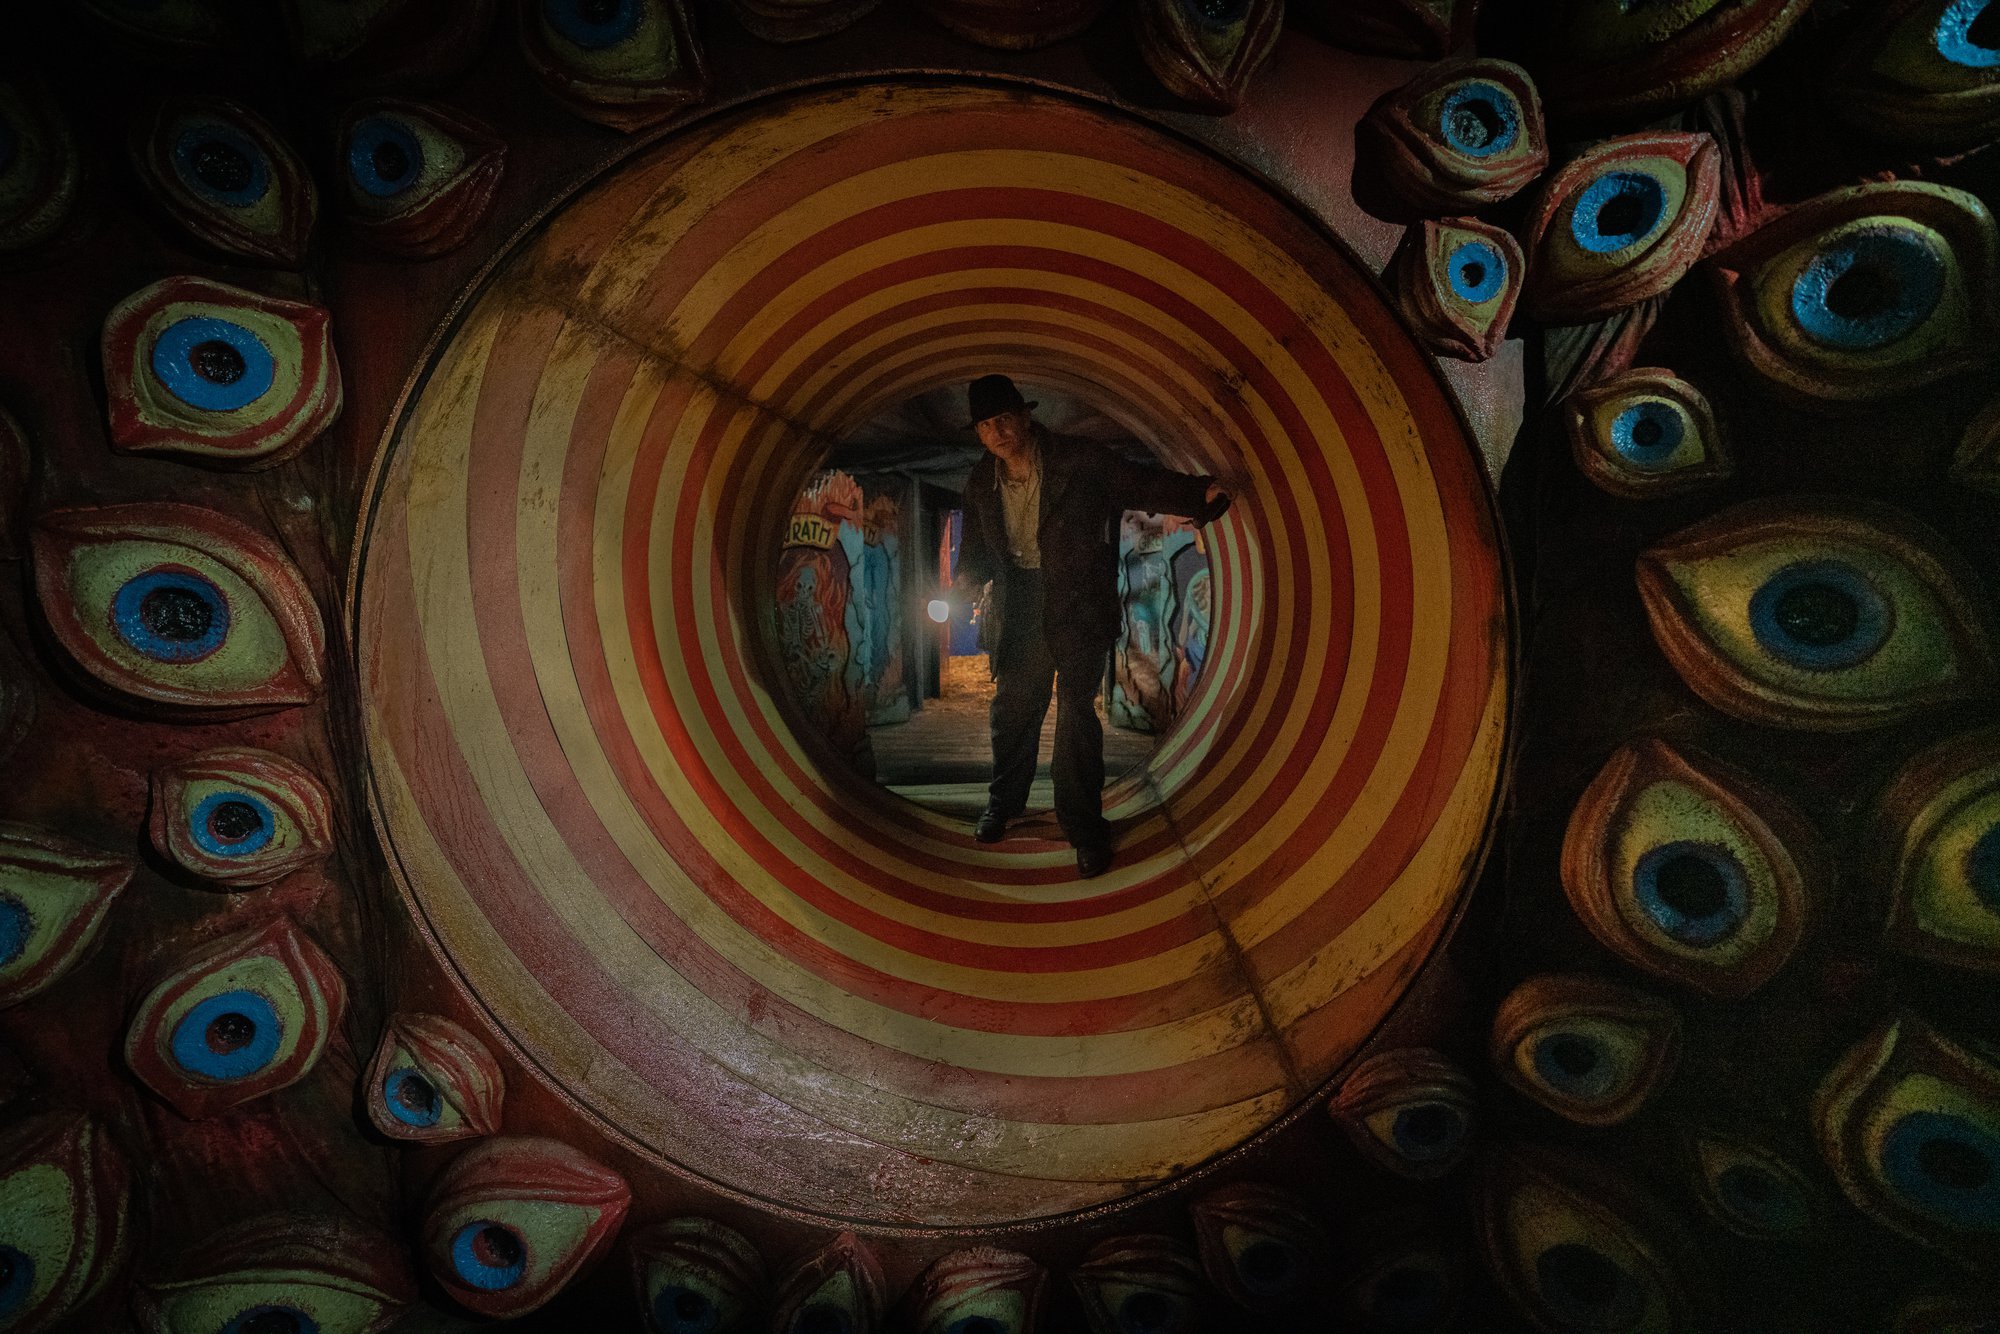 'Nightmare Alley' Bradley Cooper as Stanton Carlisle standing inside a carnival spiral tunnel